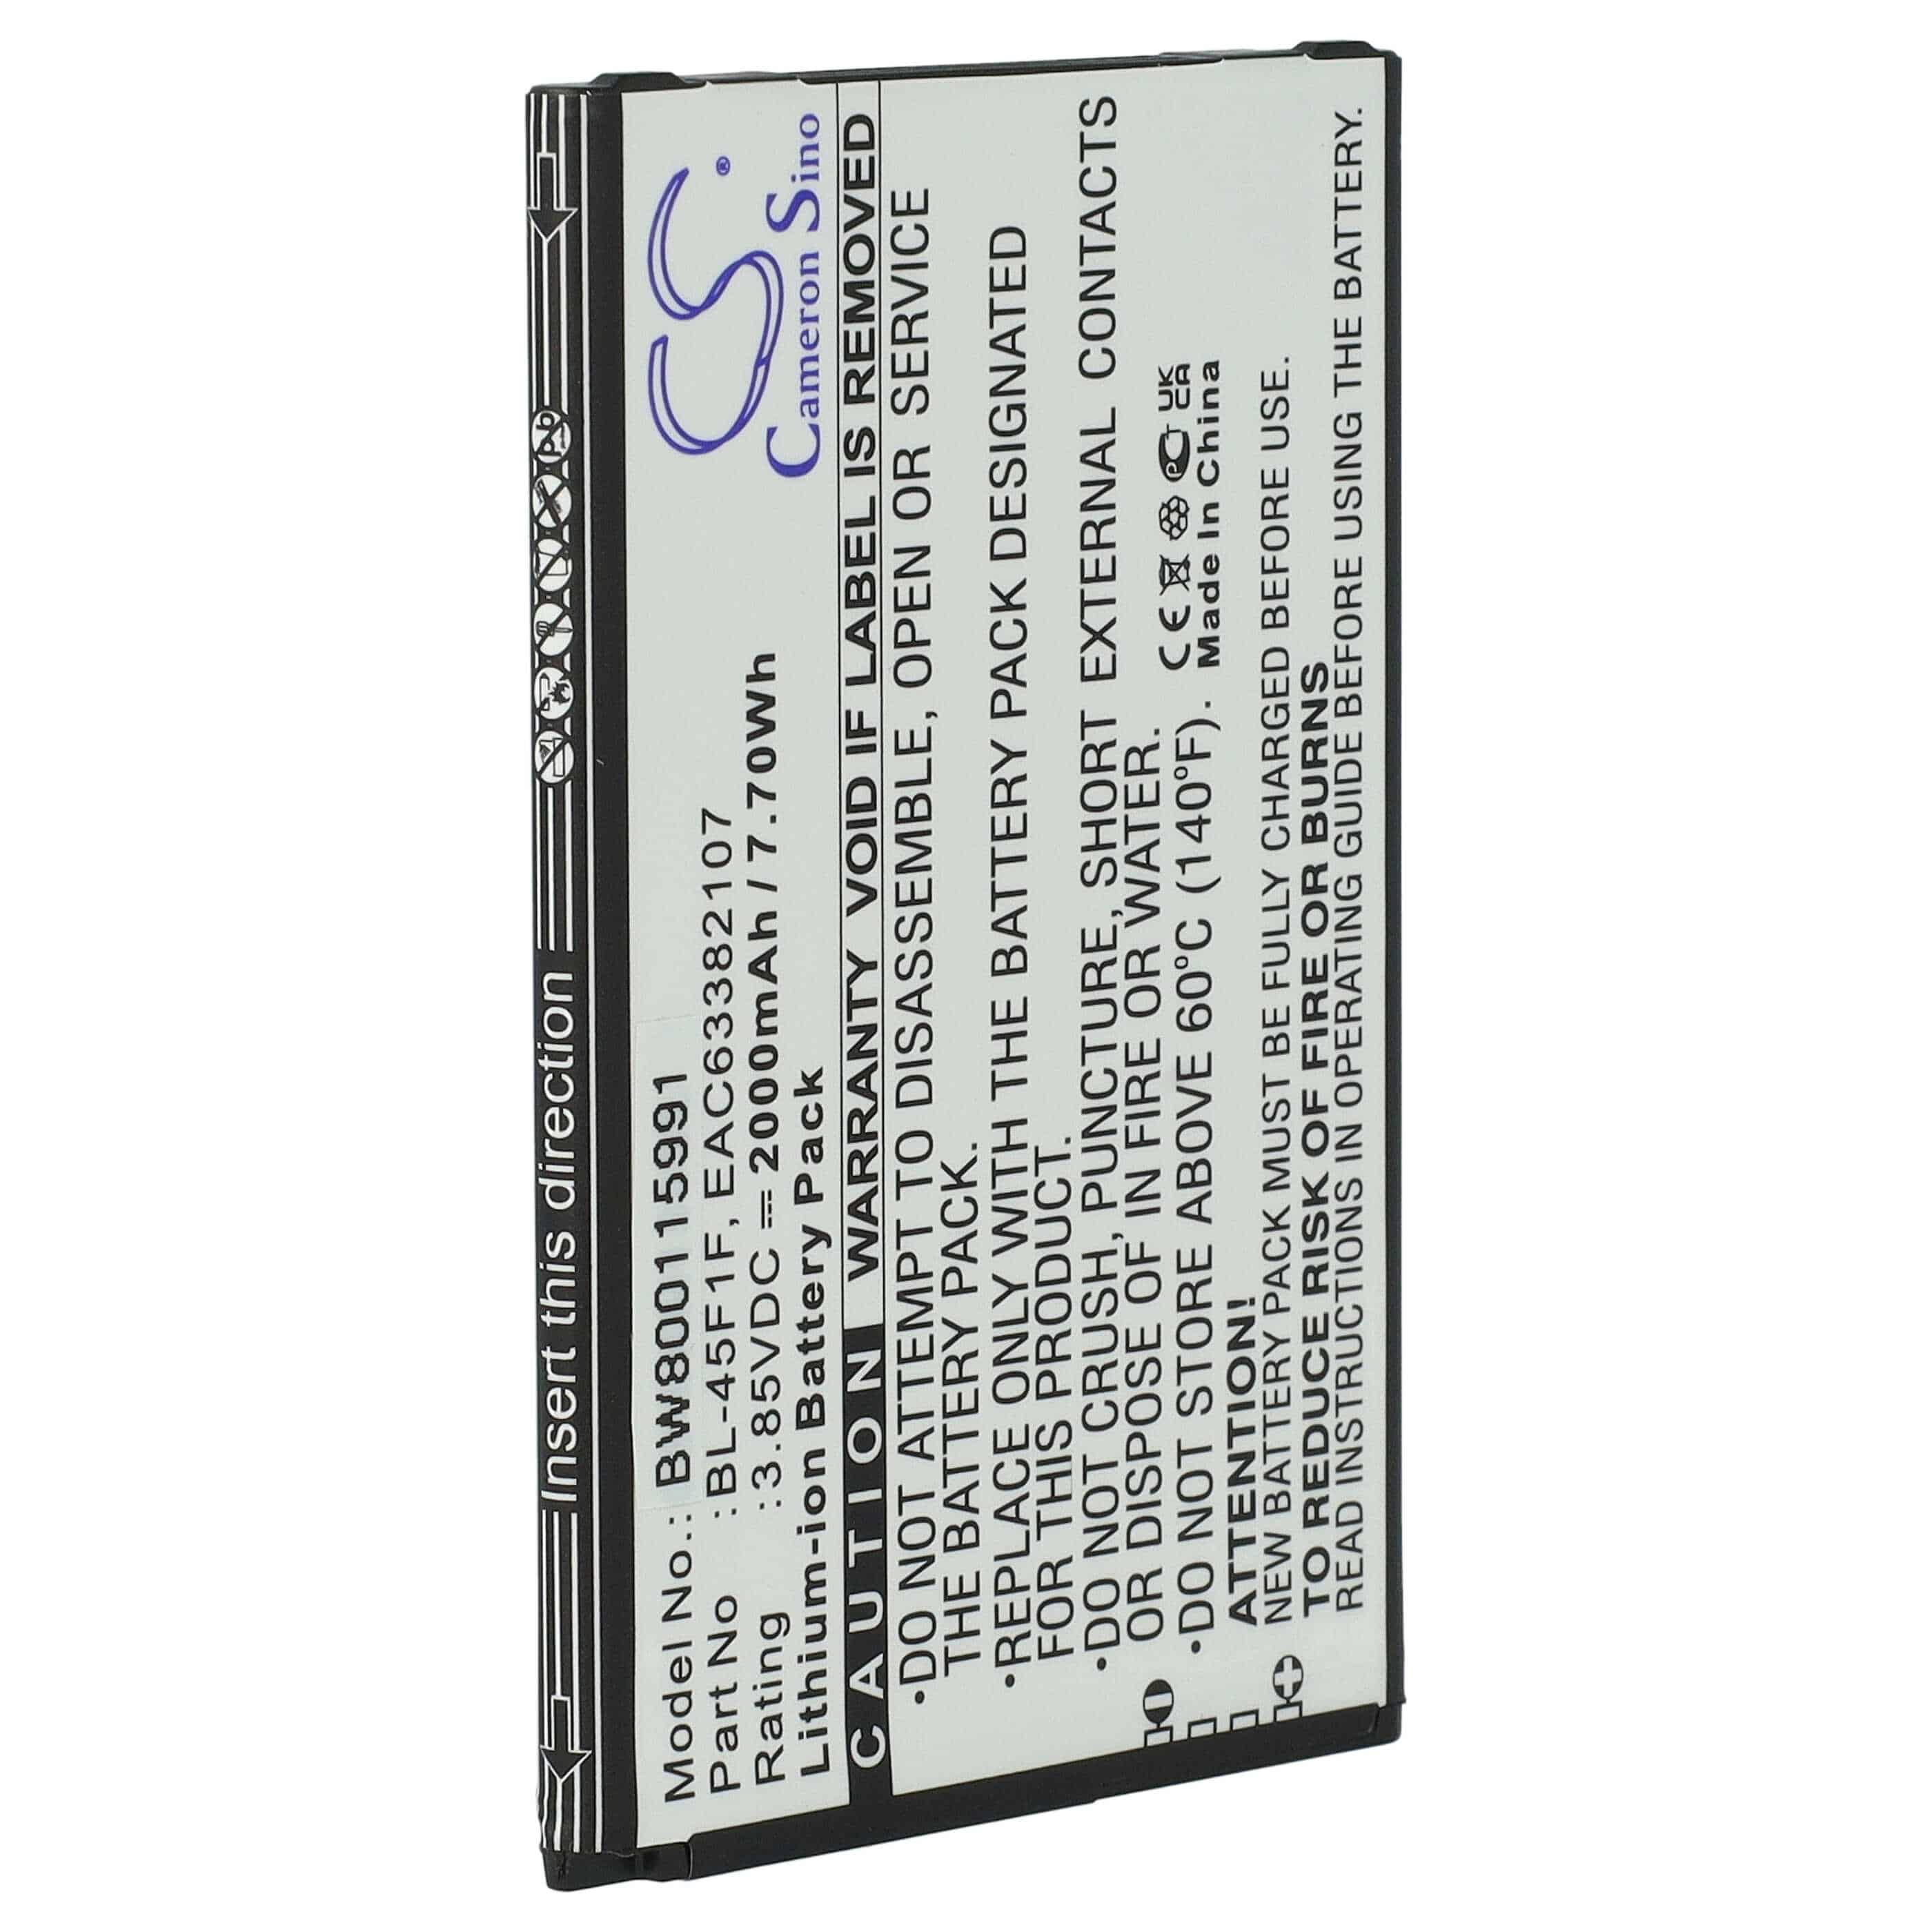 Mobile Phone Battery Replacement for LG BL-45F1F, EAC63361407, EAC63361401, EAC63321601 - 2000mAh 3.85V Li-Ion